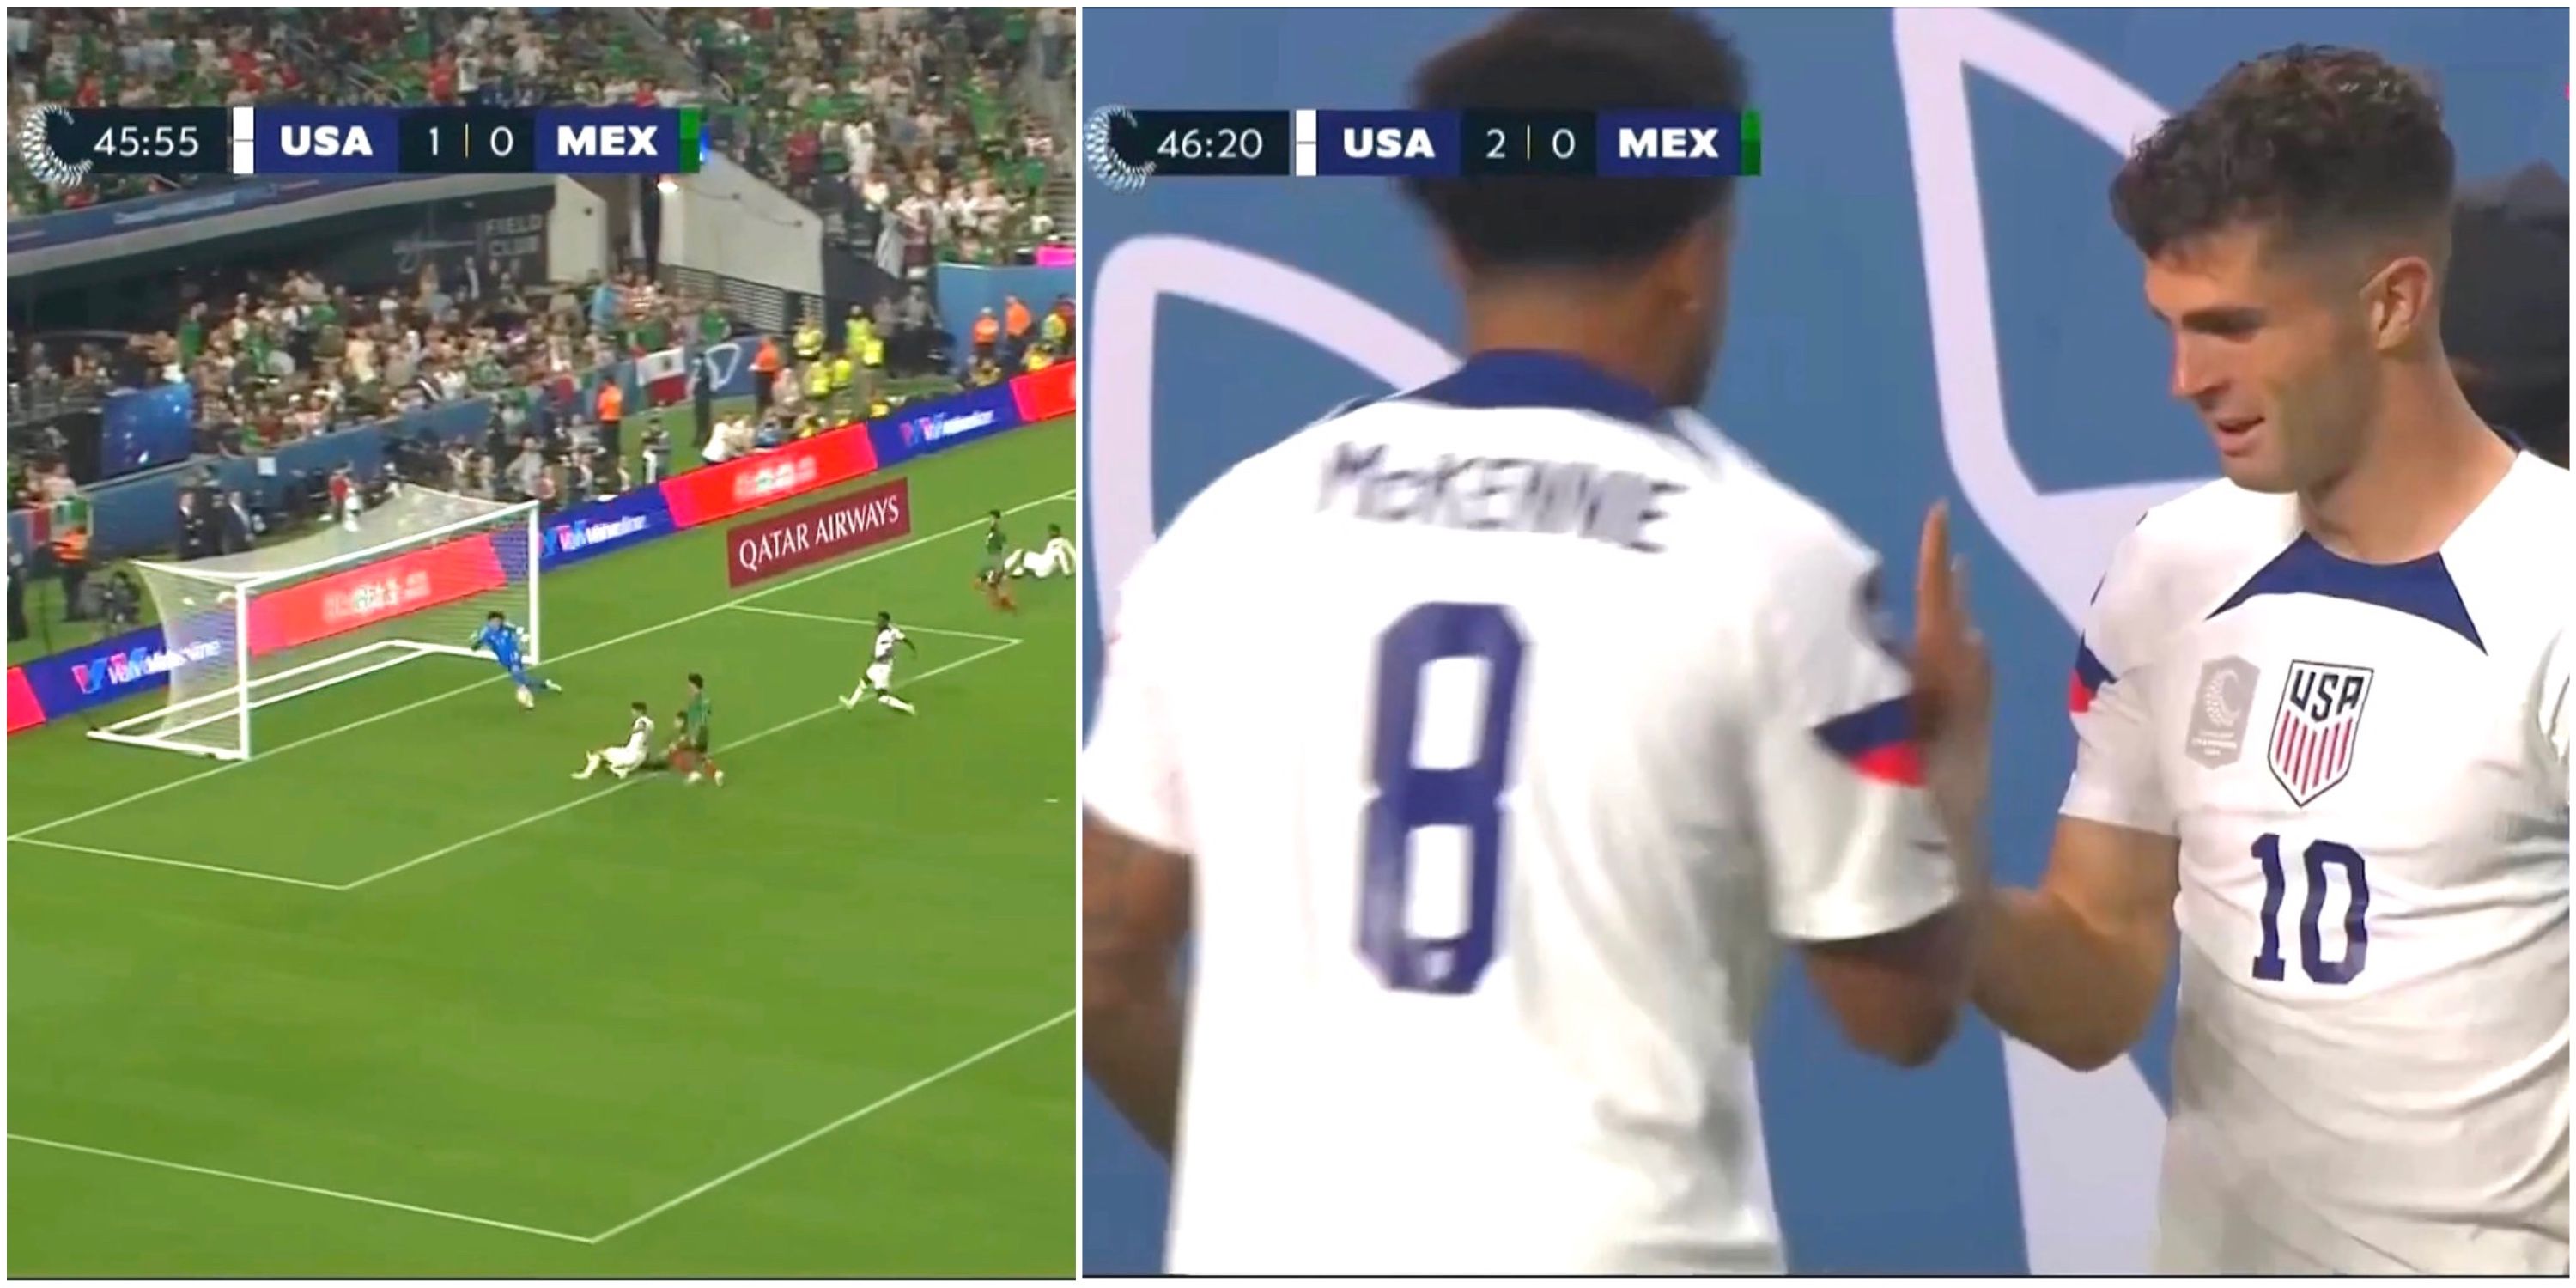 Christian Pulisic and Weston McKennie’s ice-cold celebration during USA 3-0 Mexico goes viral